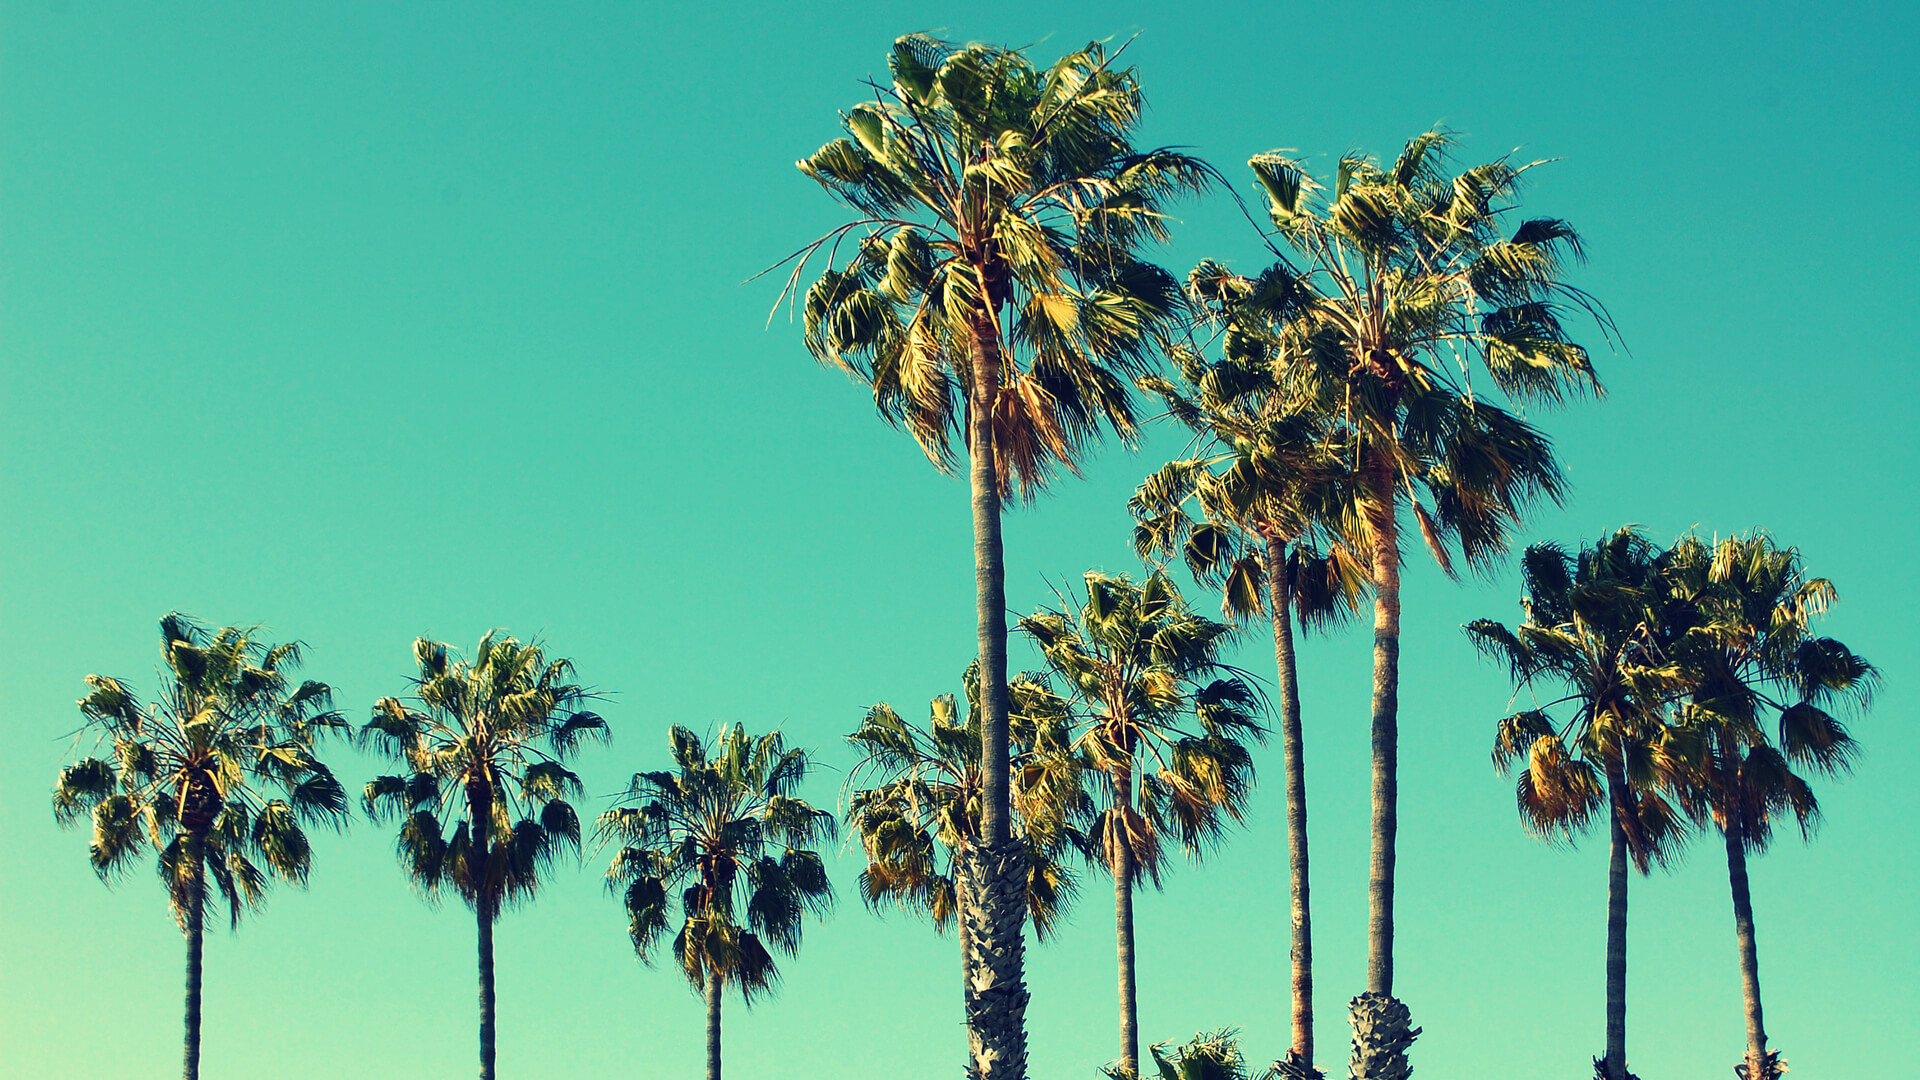 Palm Trees at Santa Monica beach on a teal background